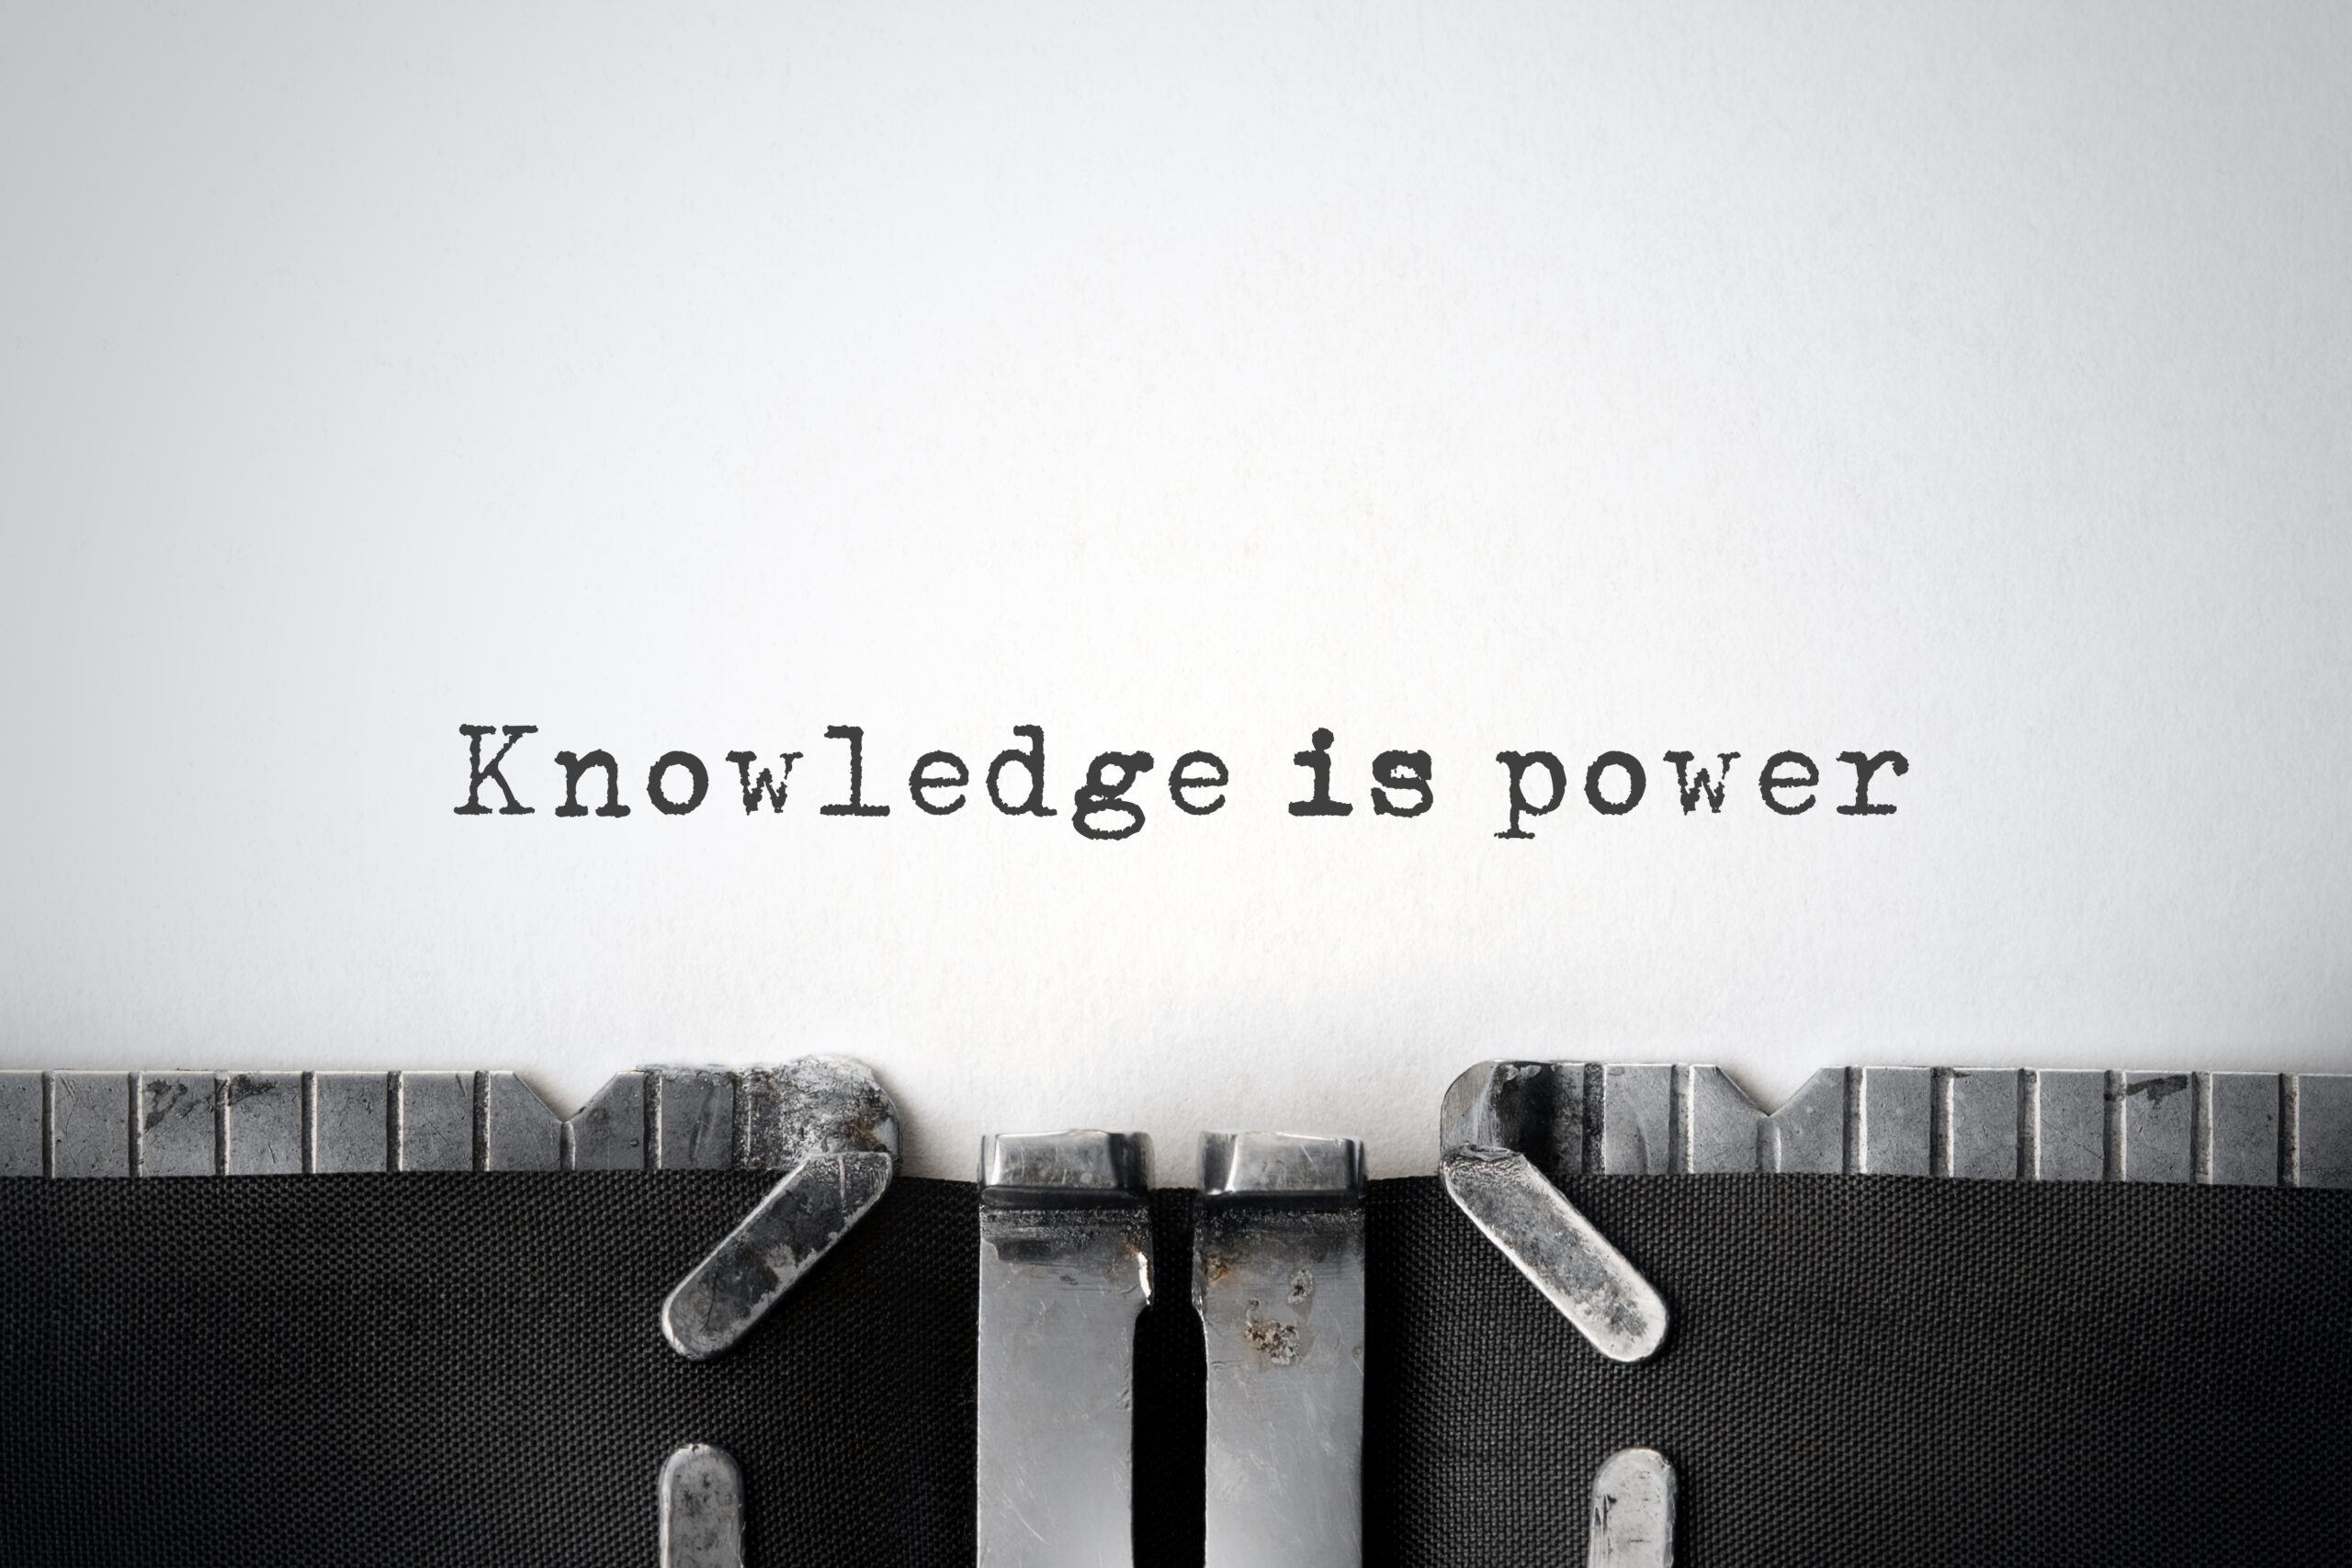 "Knowledge is power" is written on a piece of paper in a typewriter.